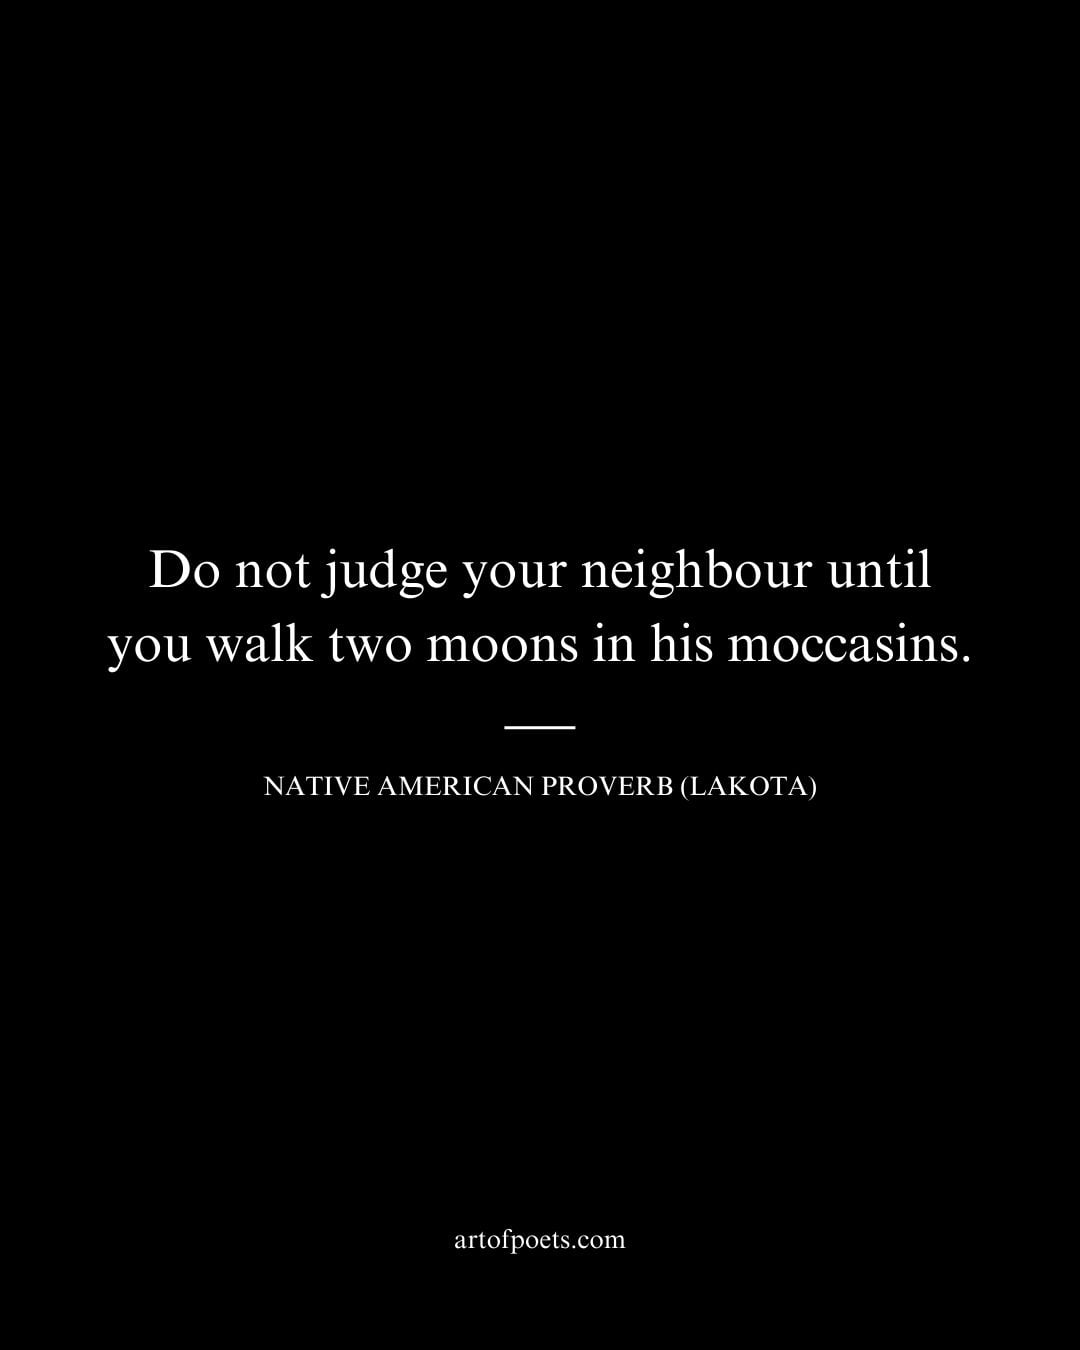 Do not judge your neighbour until you walk two moons in his moccasins